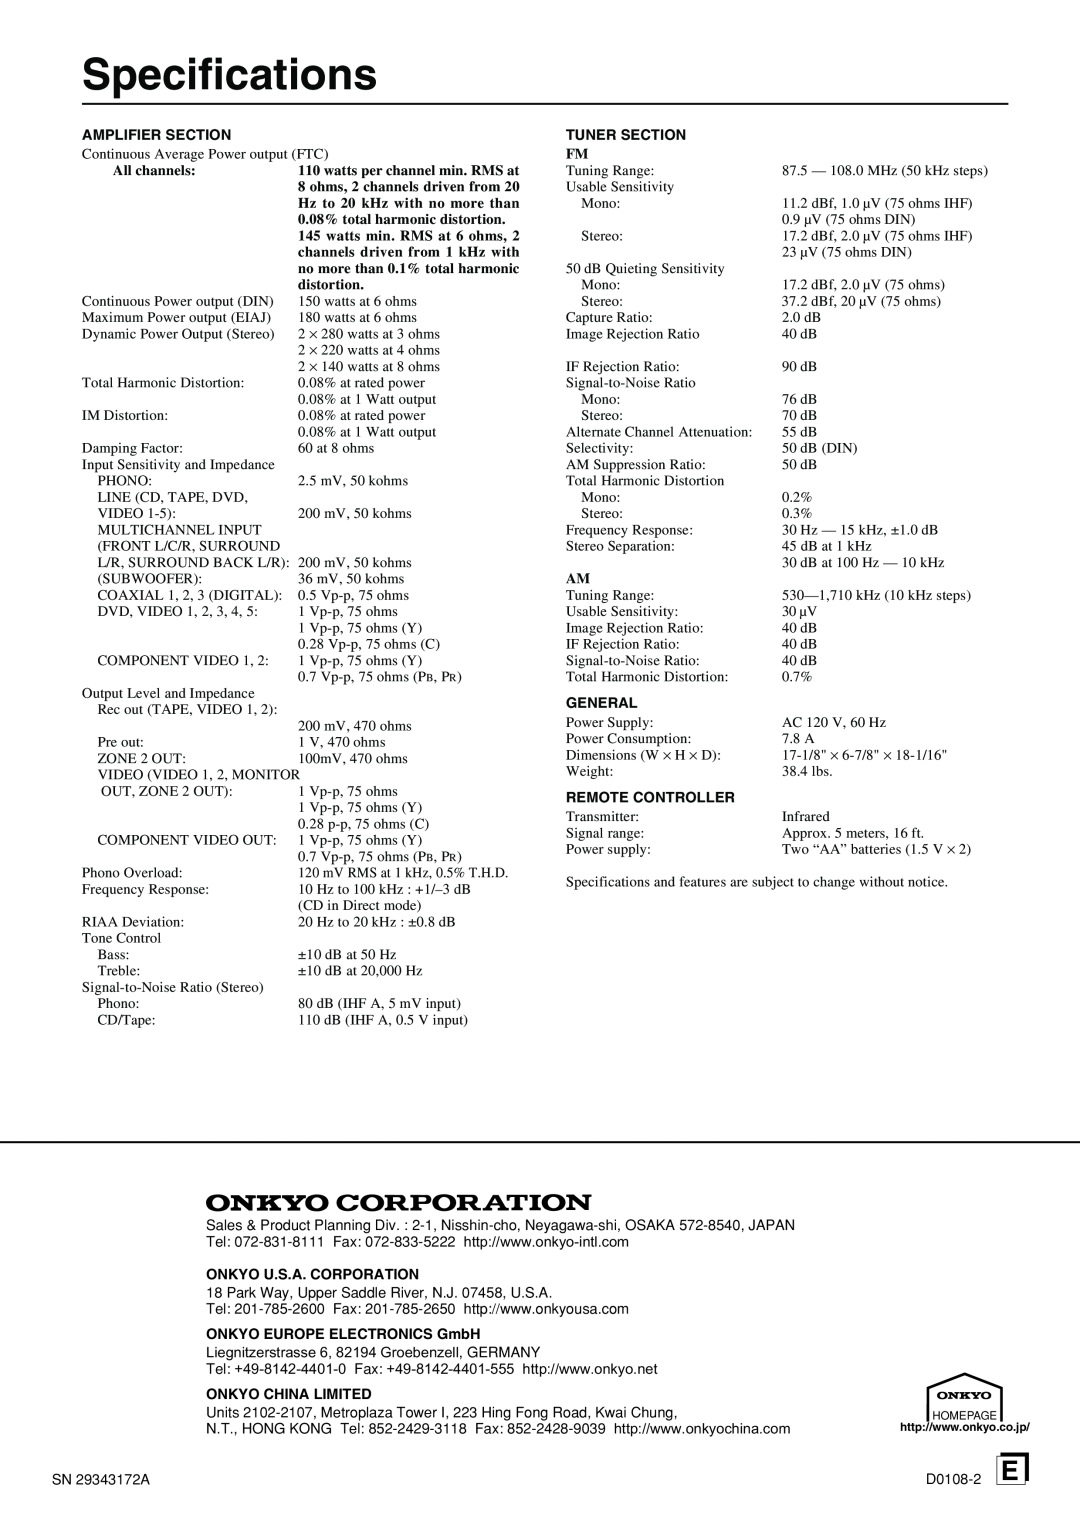 Onkyo TX-DS898 Specifications, Amplifier Section, All channels, distortion, Tuner Section, General, Remote Controller 